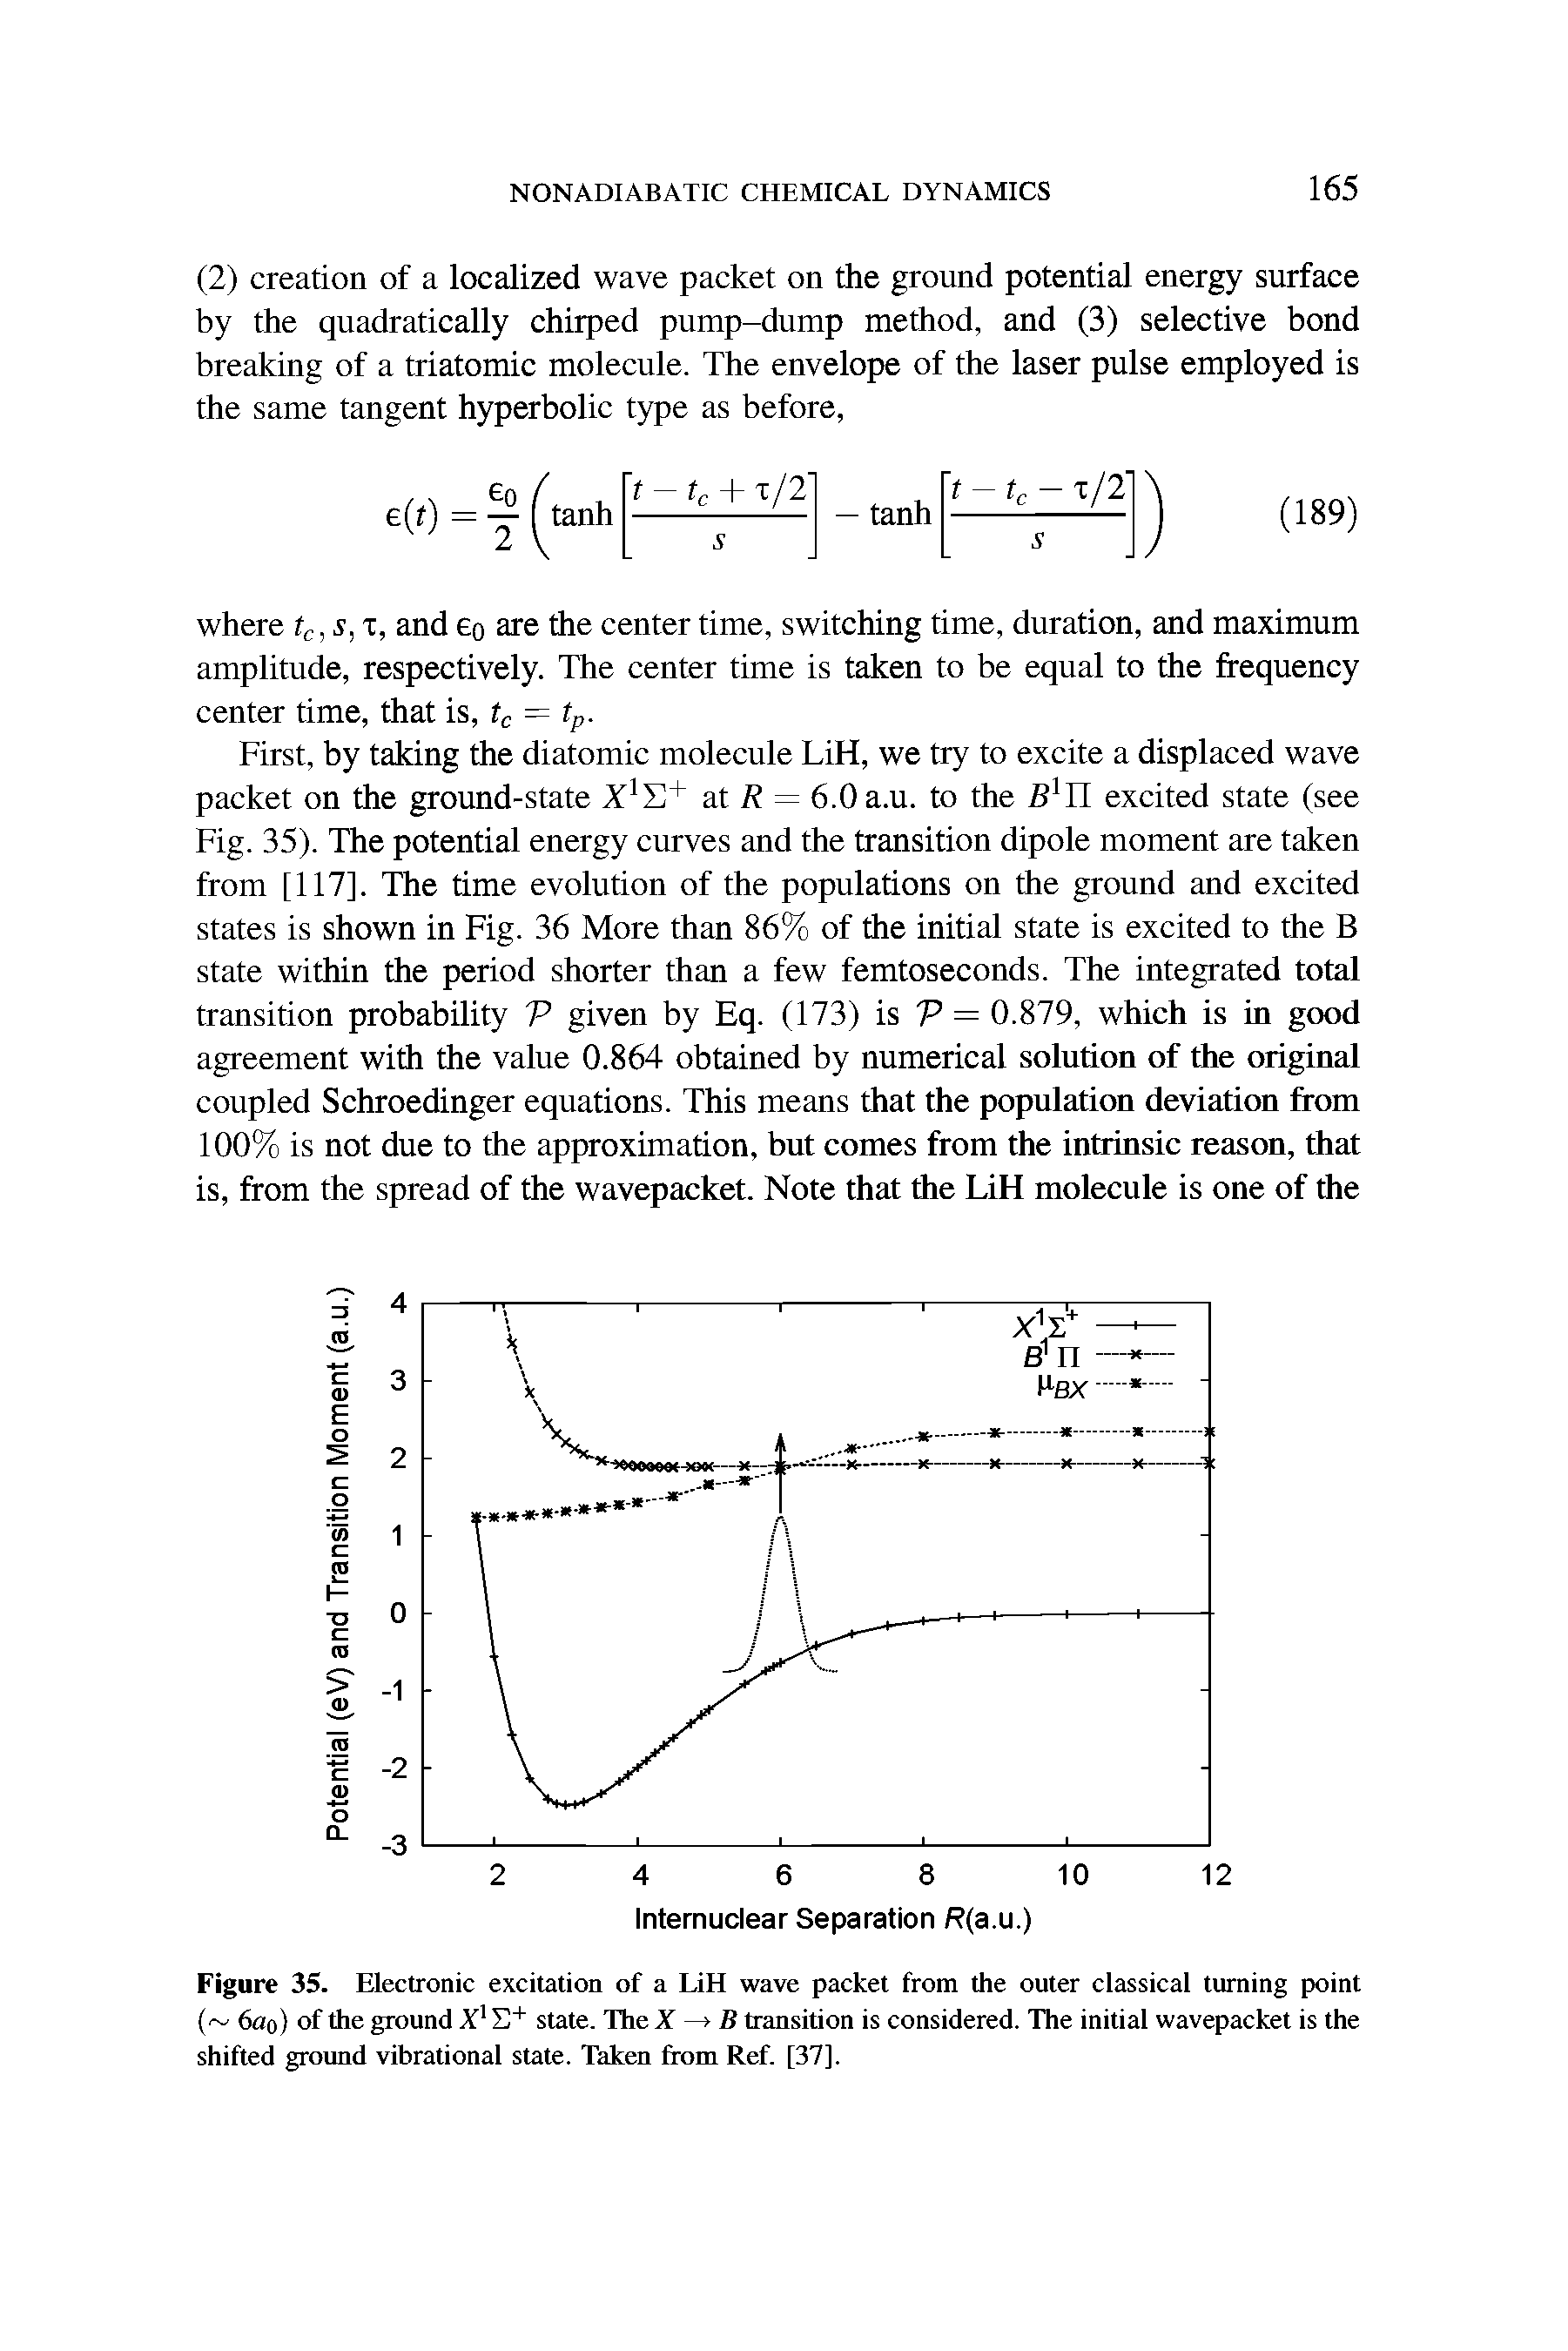 Figure 35. Electronic excitation of a LiH wave packet from the outer classical turning point 6ao) of the ground X S" state. The X —> B transition is considered. The initial wavepacket is the shifted ground vibrational state. Taken from Ref. [37].